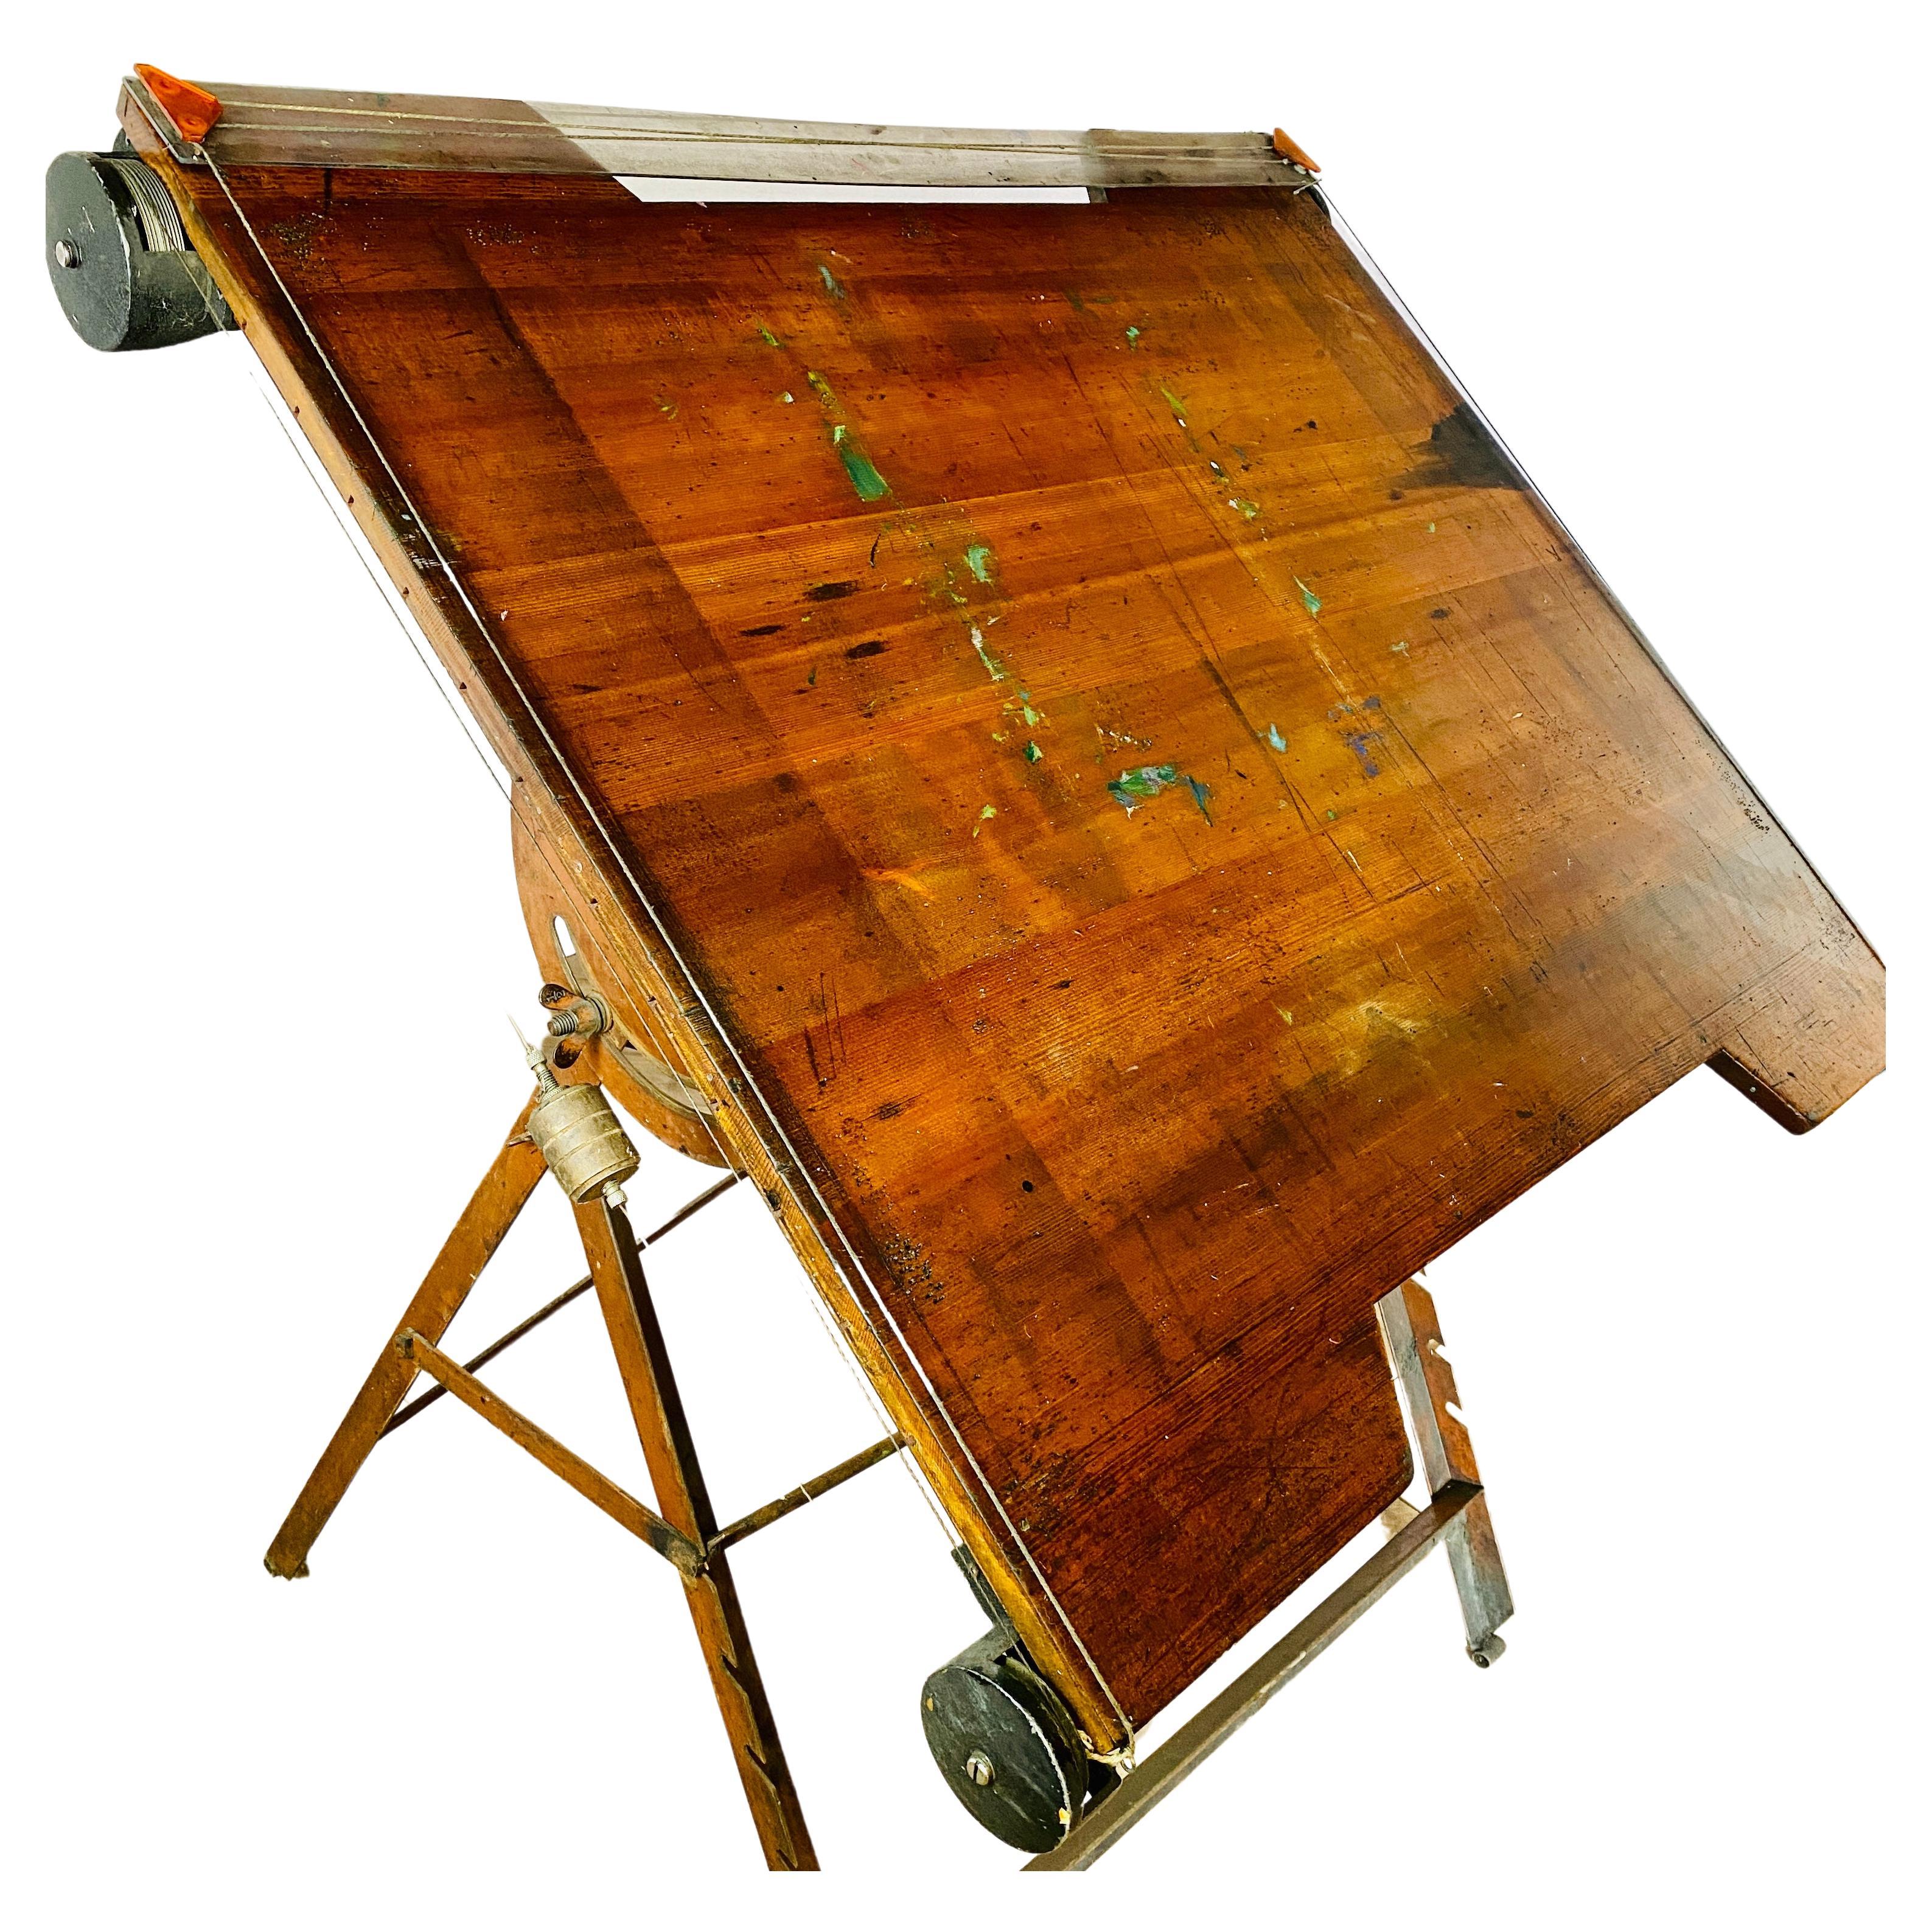 Vintage Industrial Architect or Draughtsman's Adjustable Drawing Table, 1950s